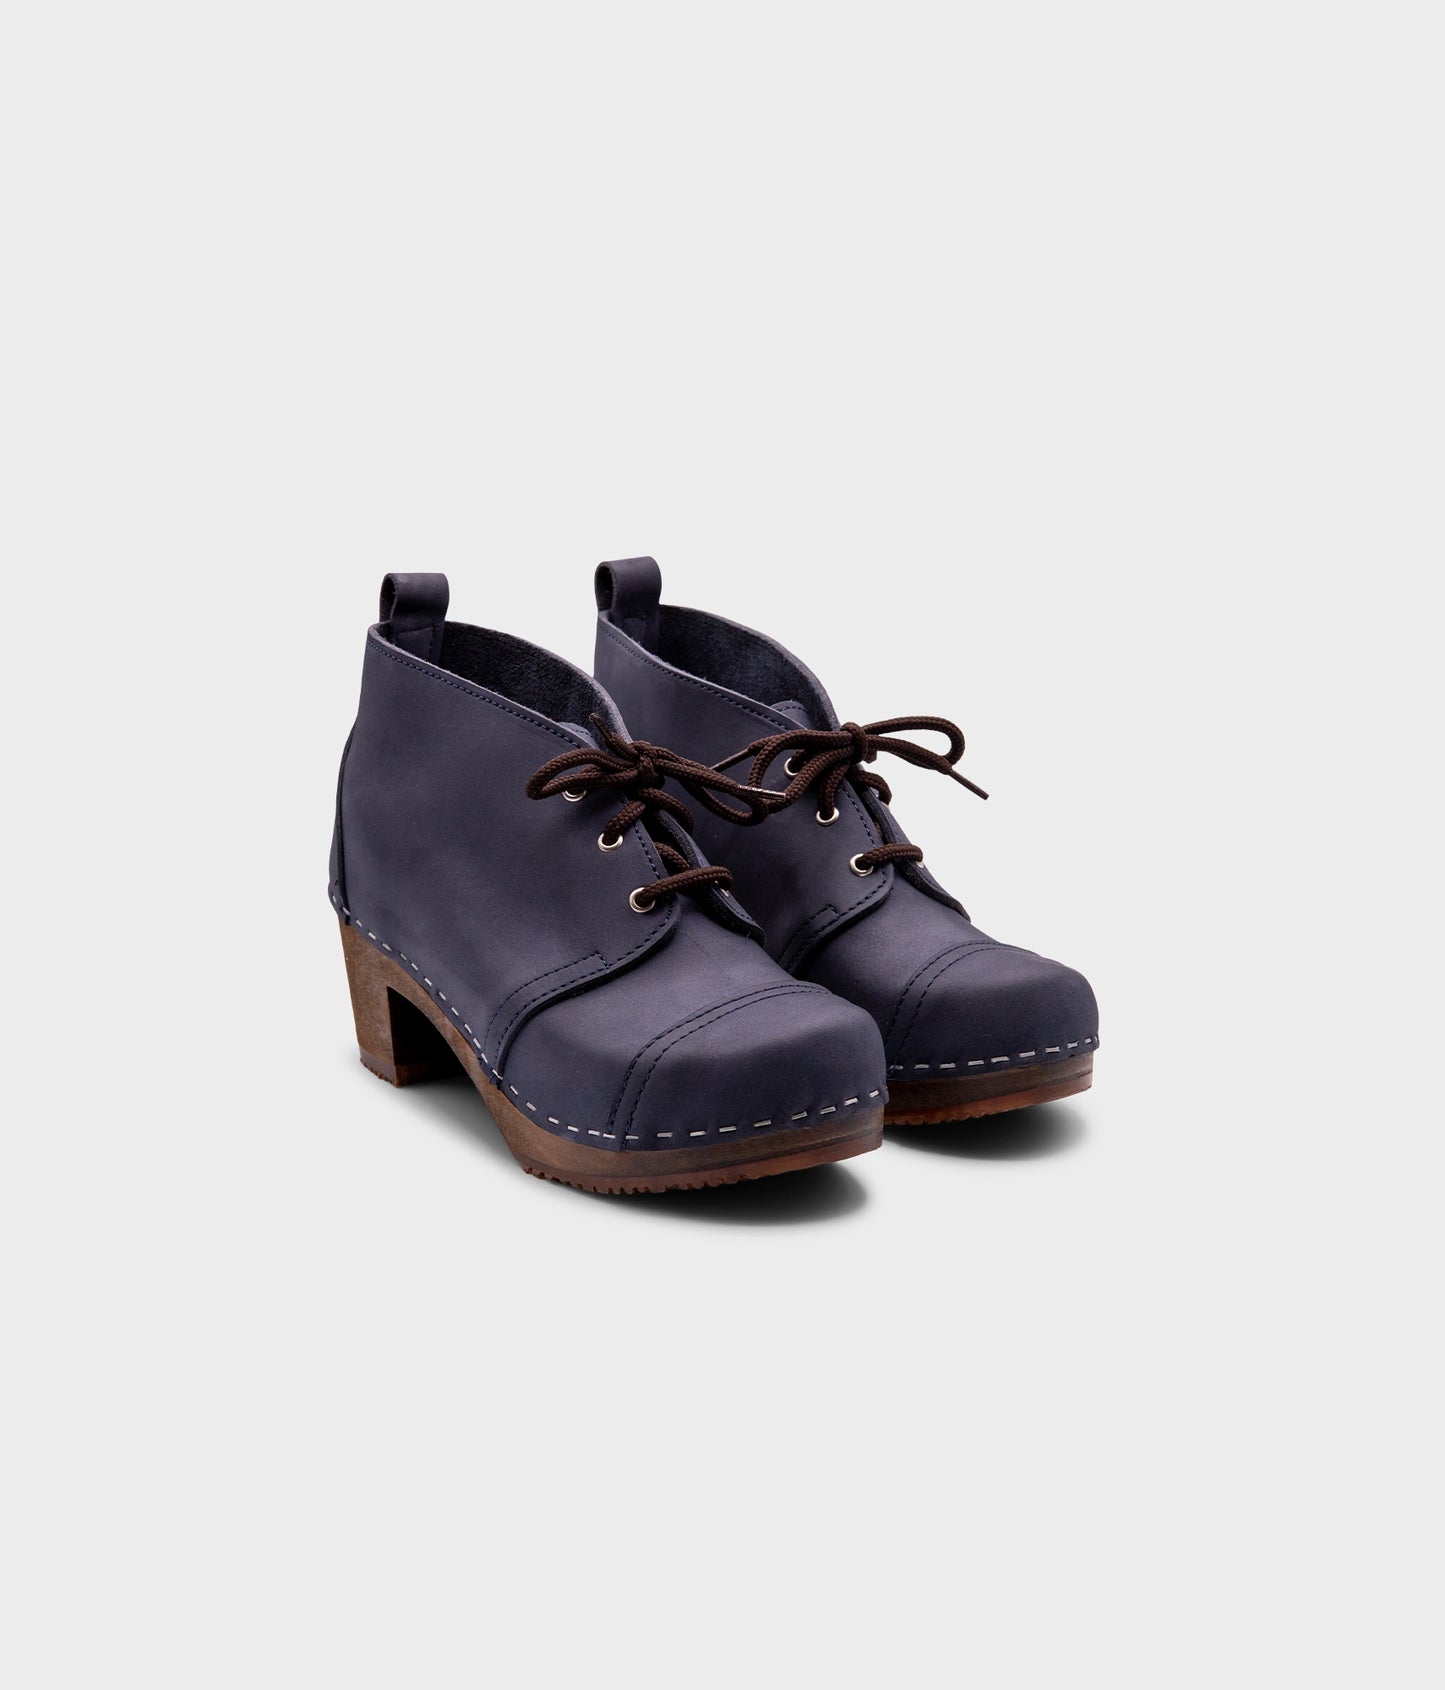 high heeled chukka clog boots in navy blue nubuck leather stapled on a dark wooden base with brown laces